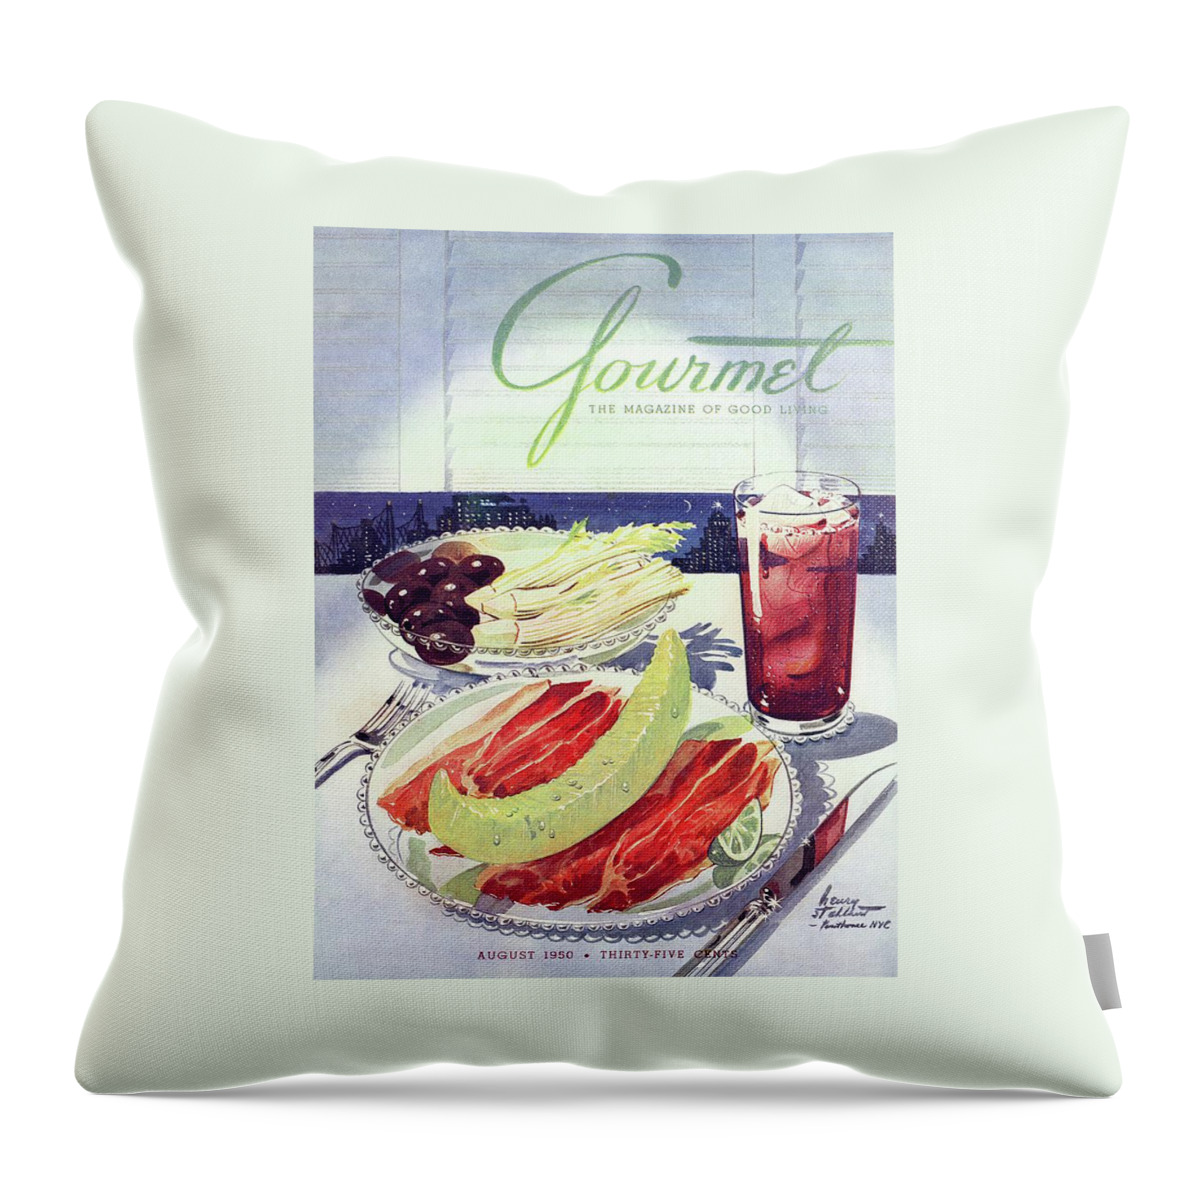 Prosciutto, Melon, Olives, Celery And A Glass Throw Pillow